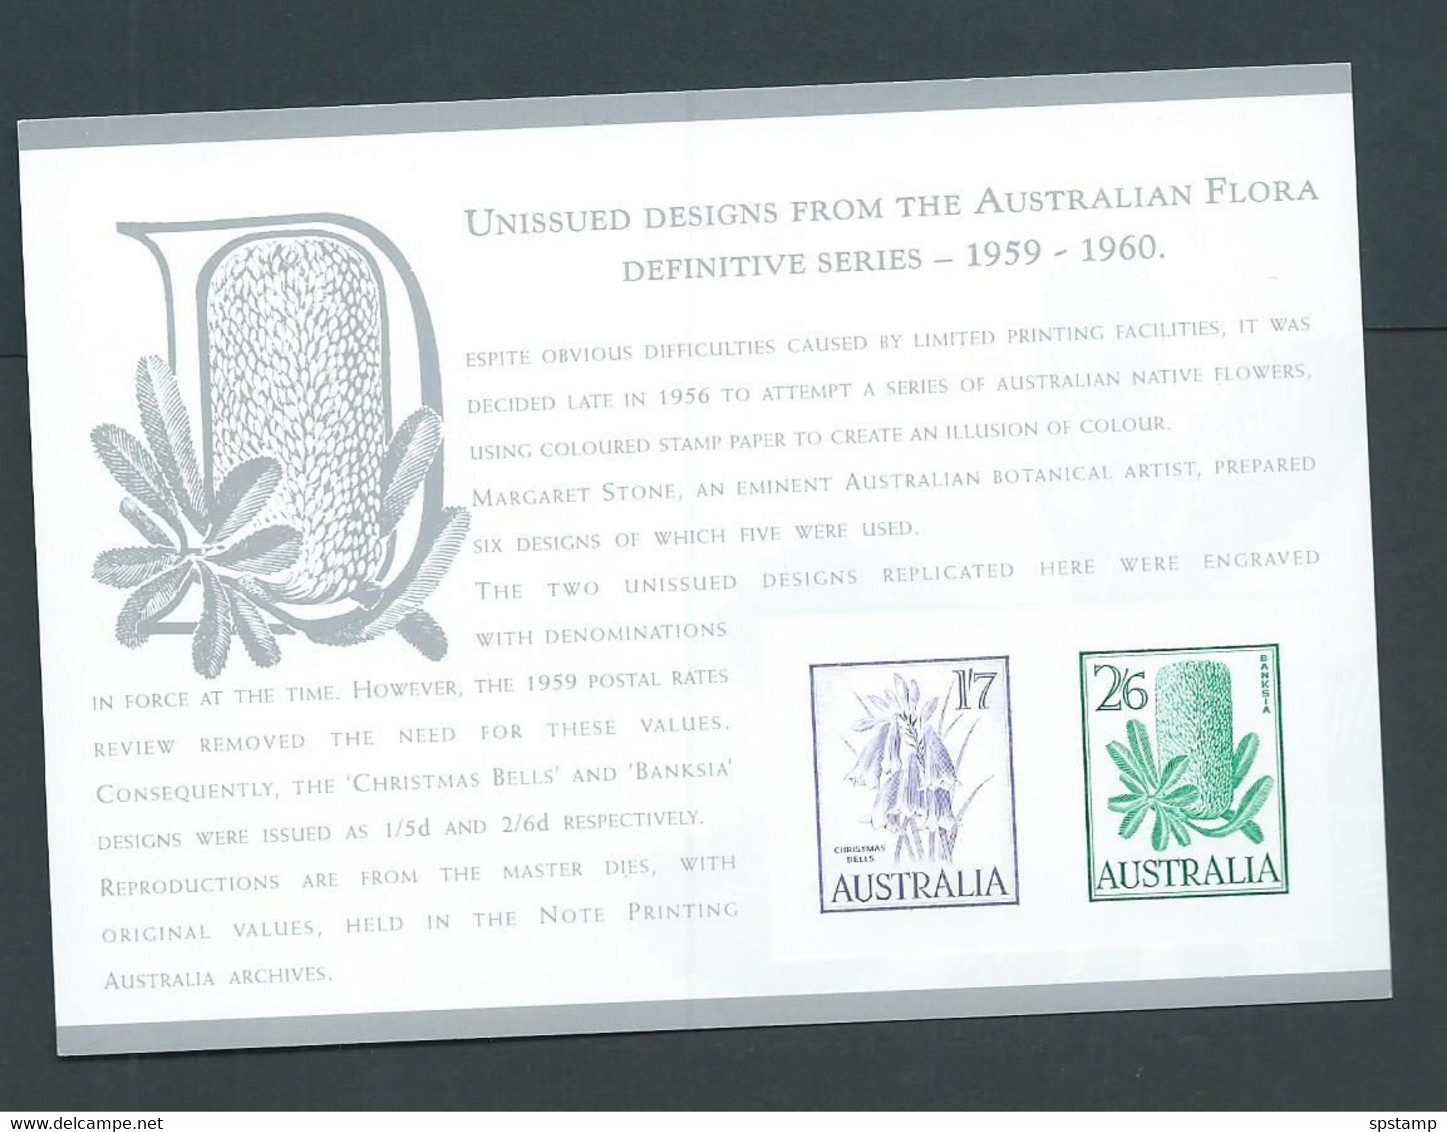 Australia 1994 Flowers Un-issued Designs Of 1959 Proof Reprint On Official APO Replica Card 30 - Proofs & Reprints